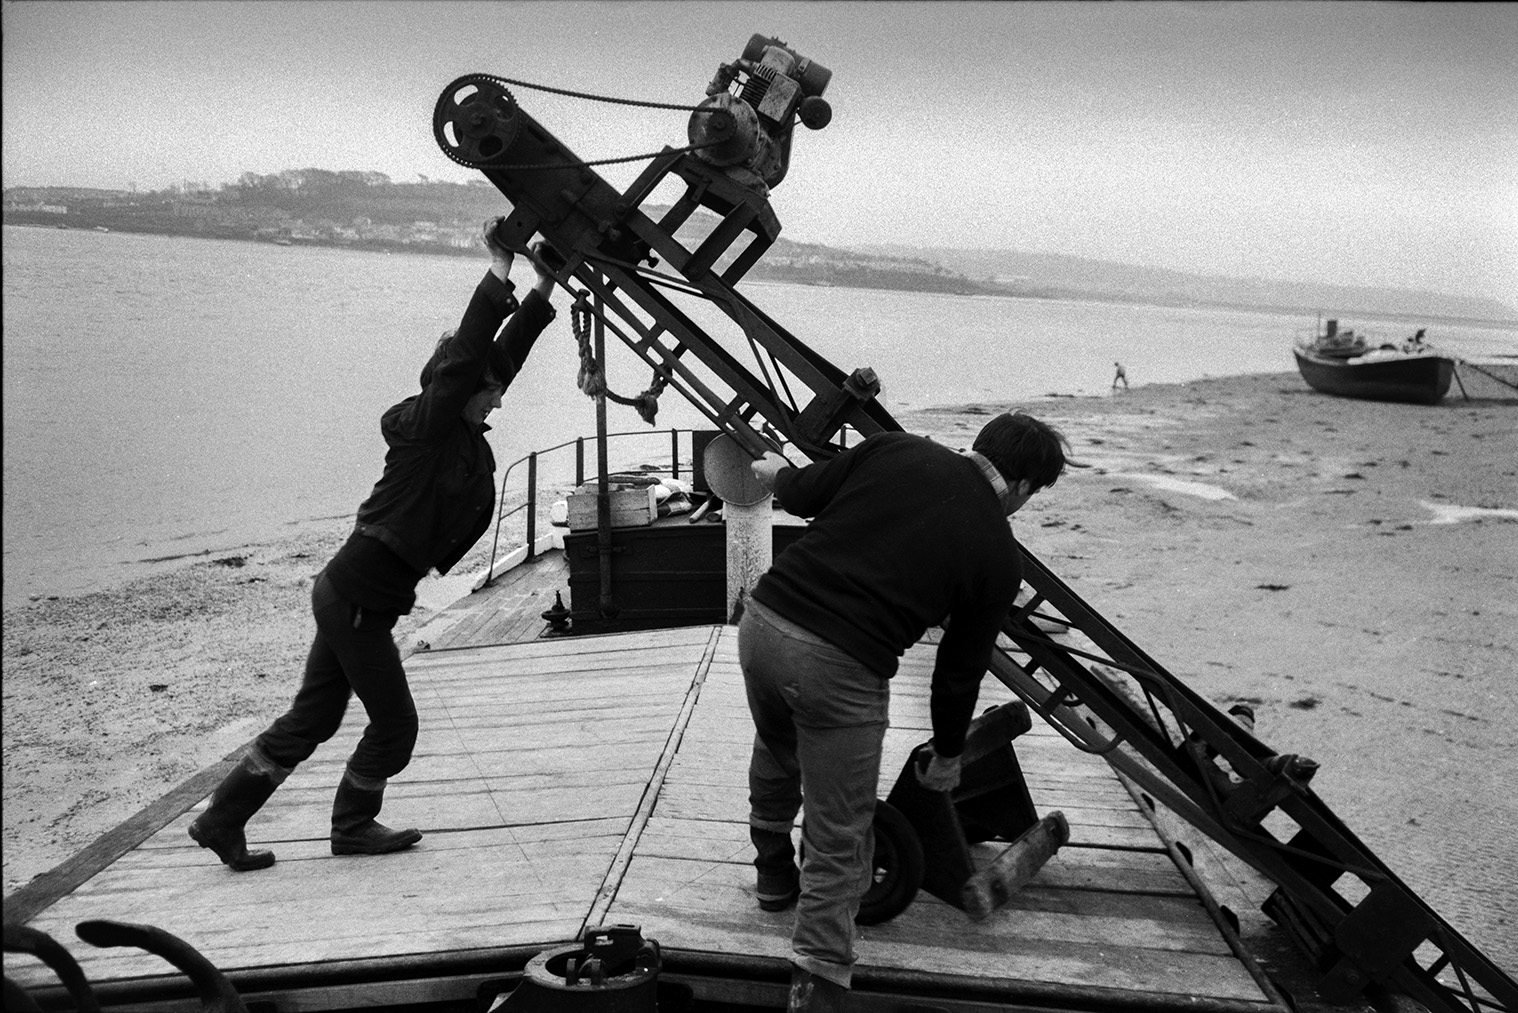 Men moving a conveyor belt or elevator off a sand barge and onto the beach at Crow Point, Braunton. The estuary of the Taw River can be seen in the background.